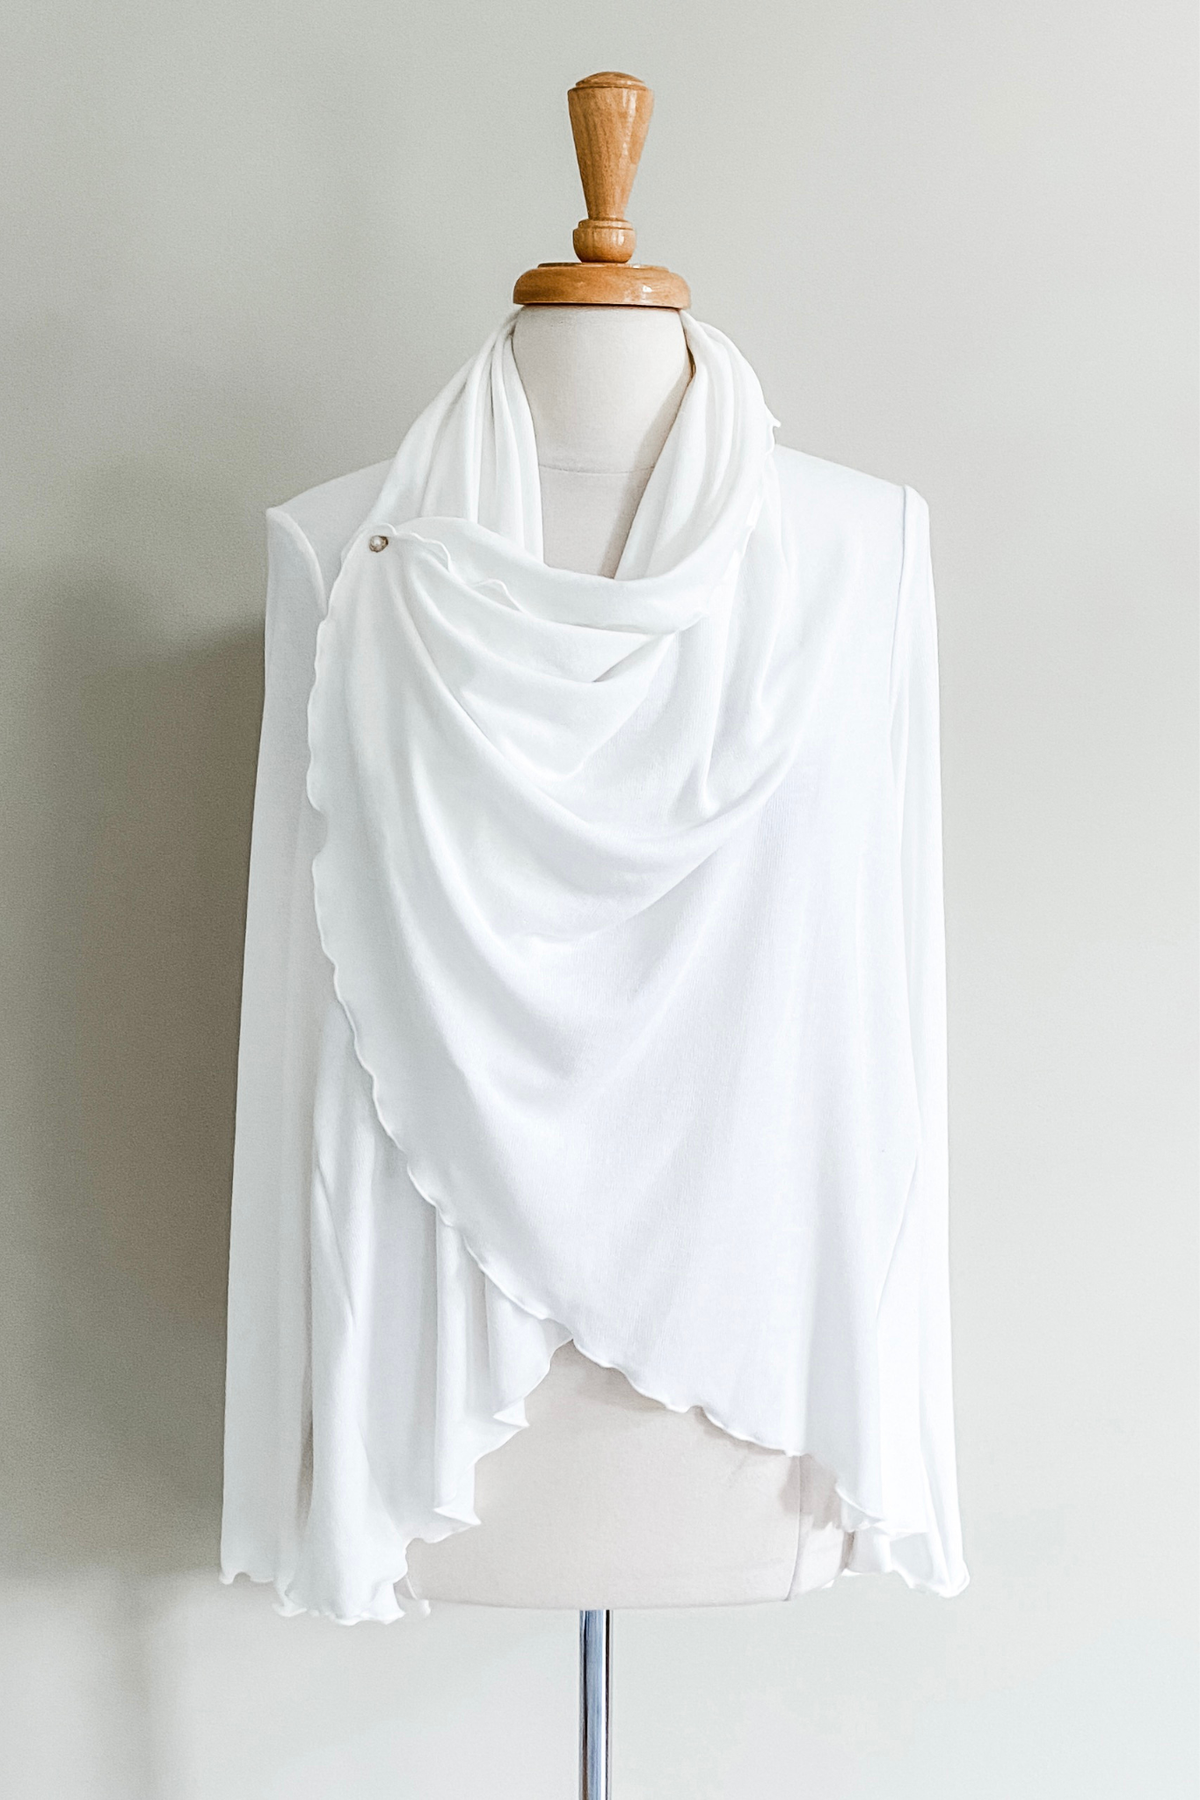 Infinity Flow Travel Cardigan in White color from Diane Kroe